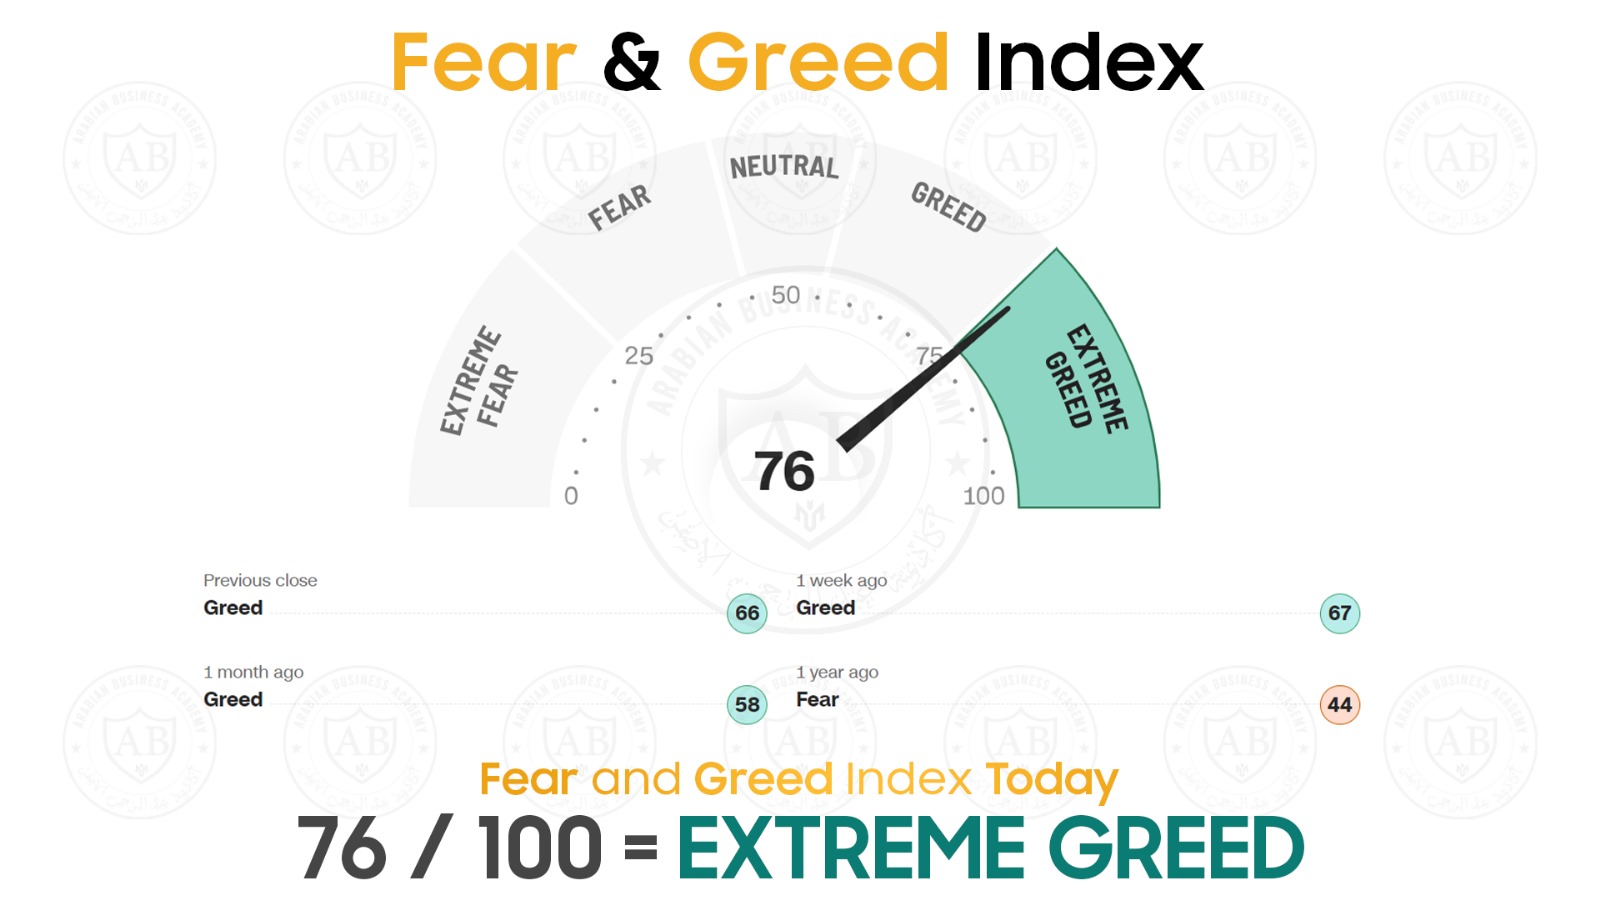 feer and greed index 76/100